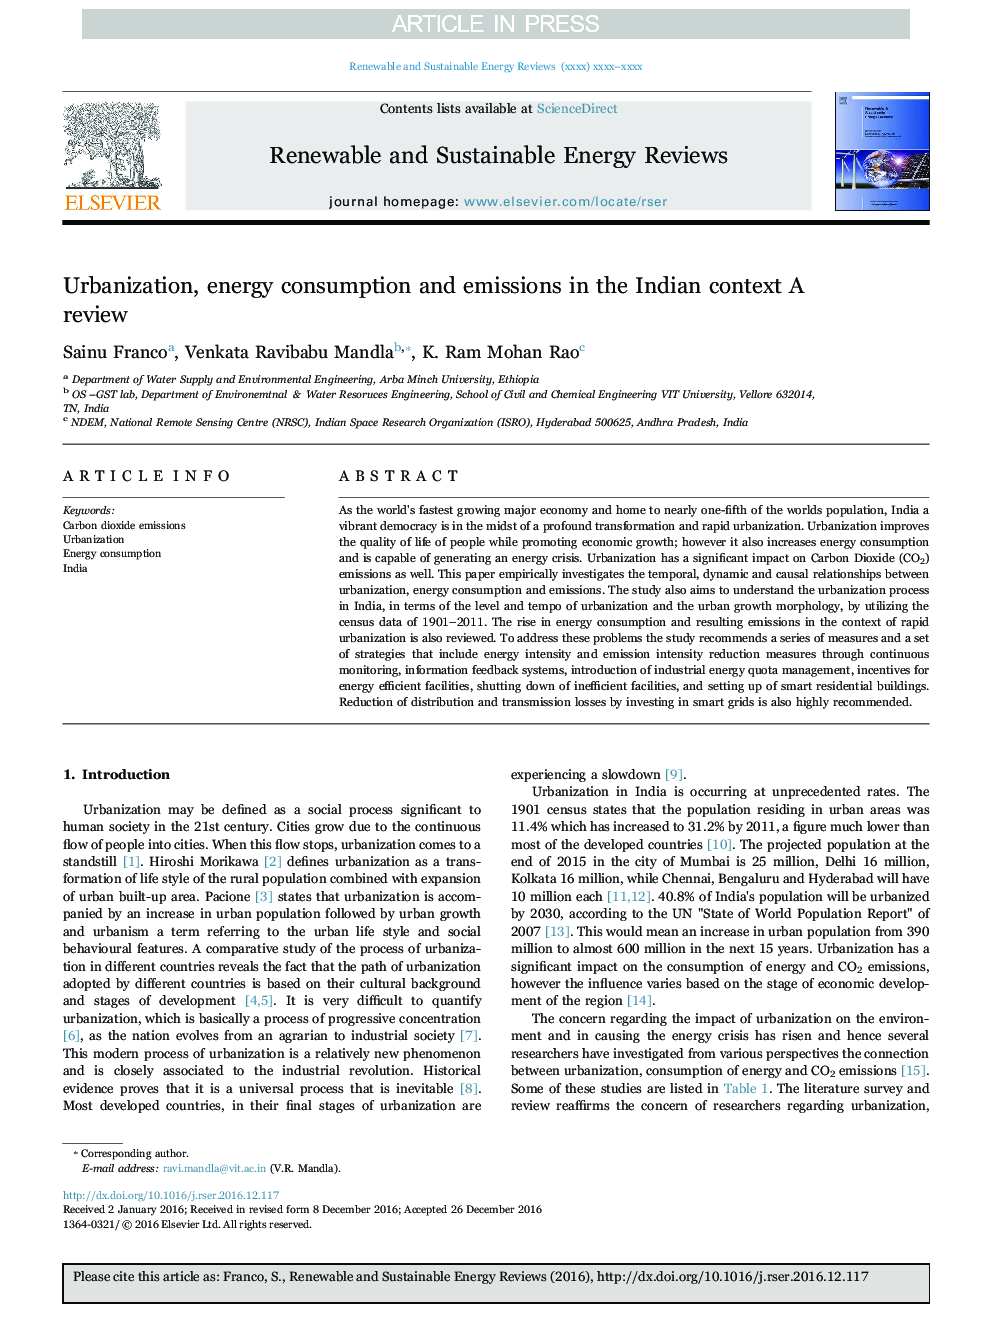 Urbanization, energy consumption and emissions in the Indian context A review